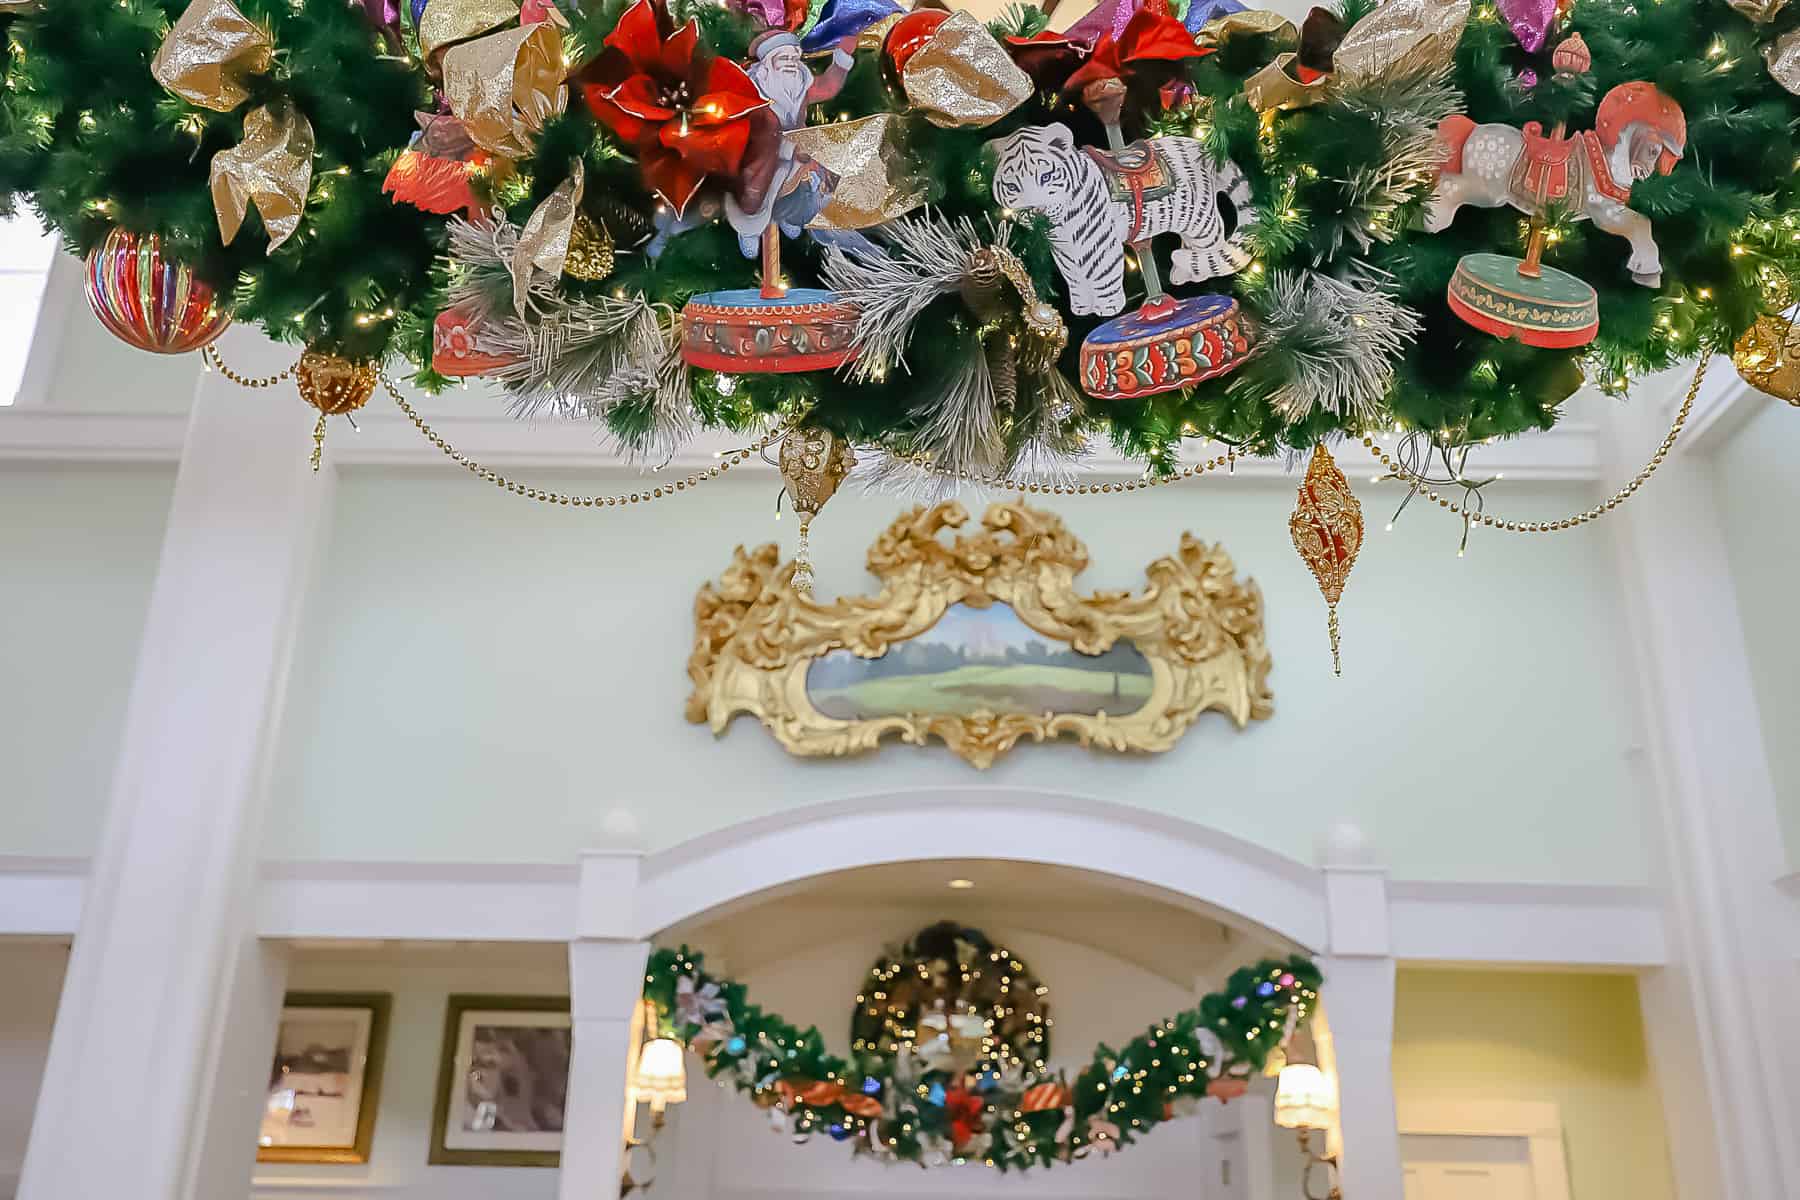 festive garland rows in the lobby of Disney's Boardwalk at Christmas